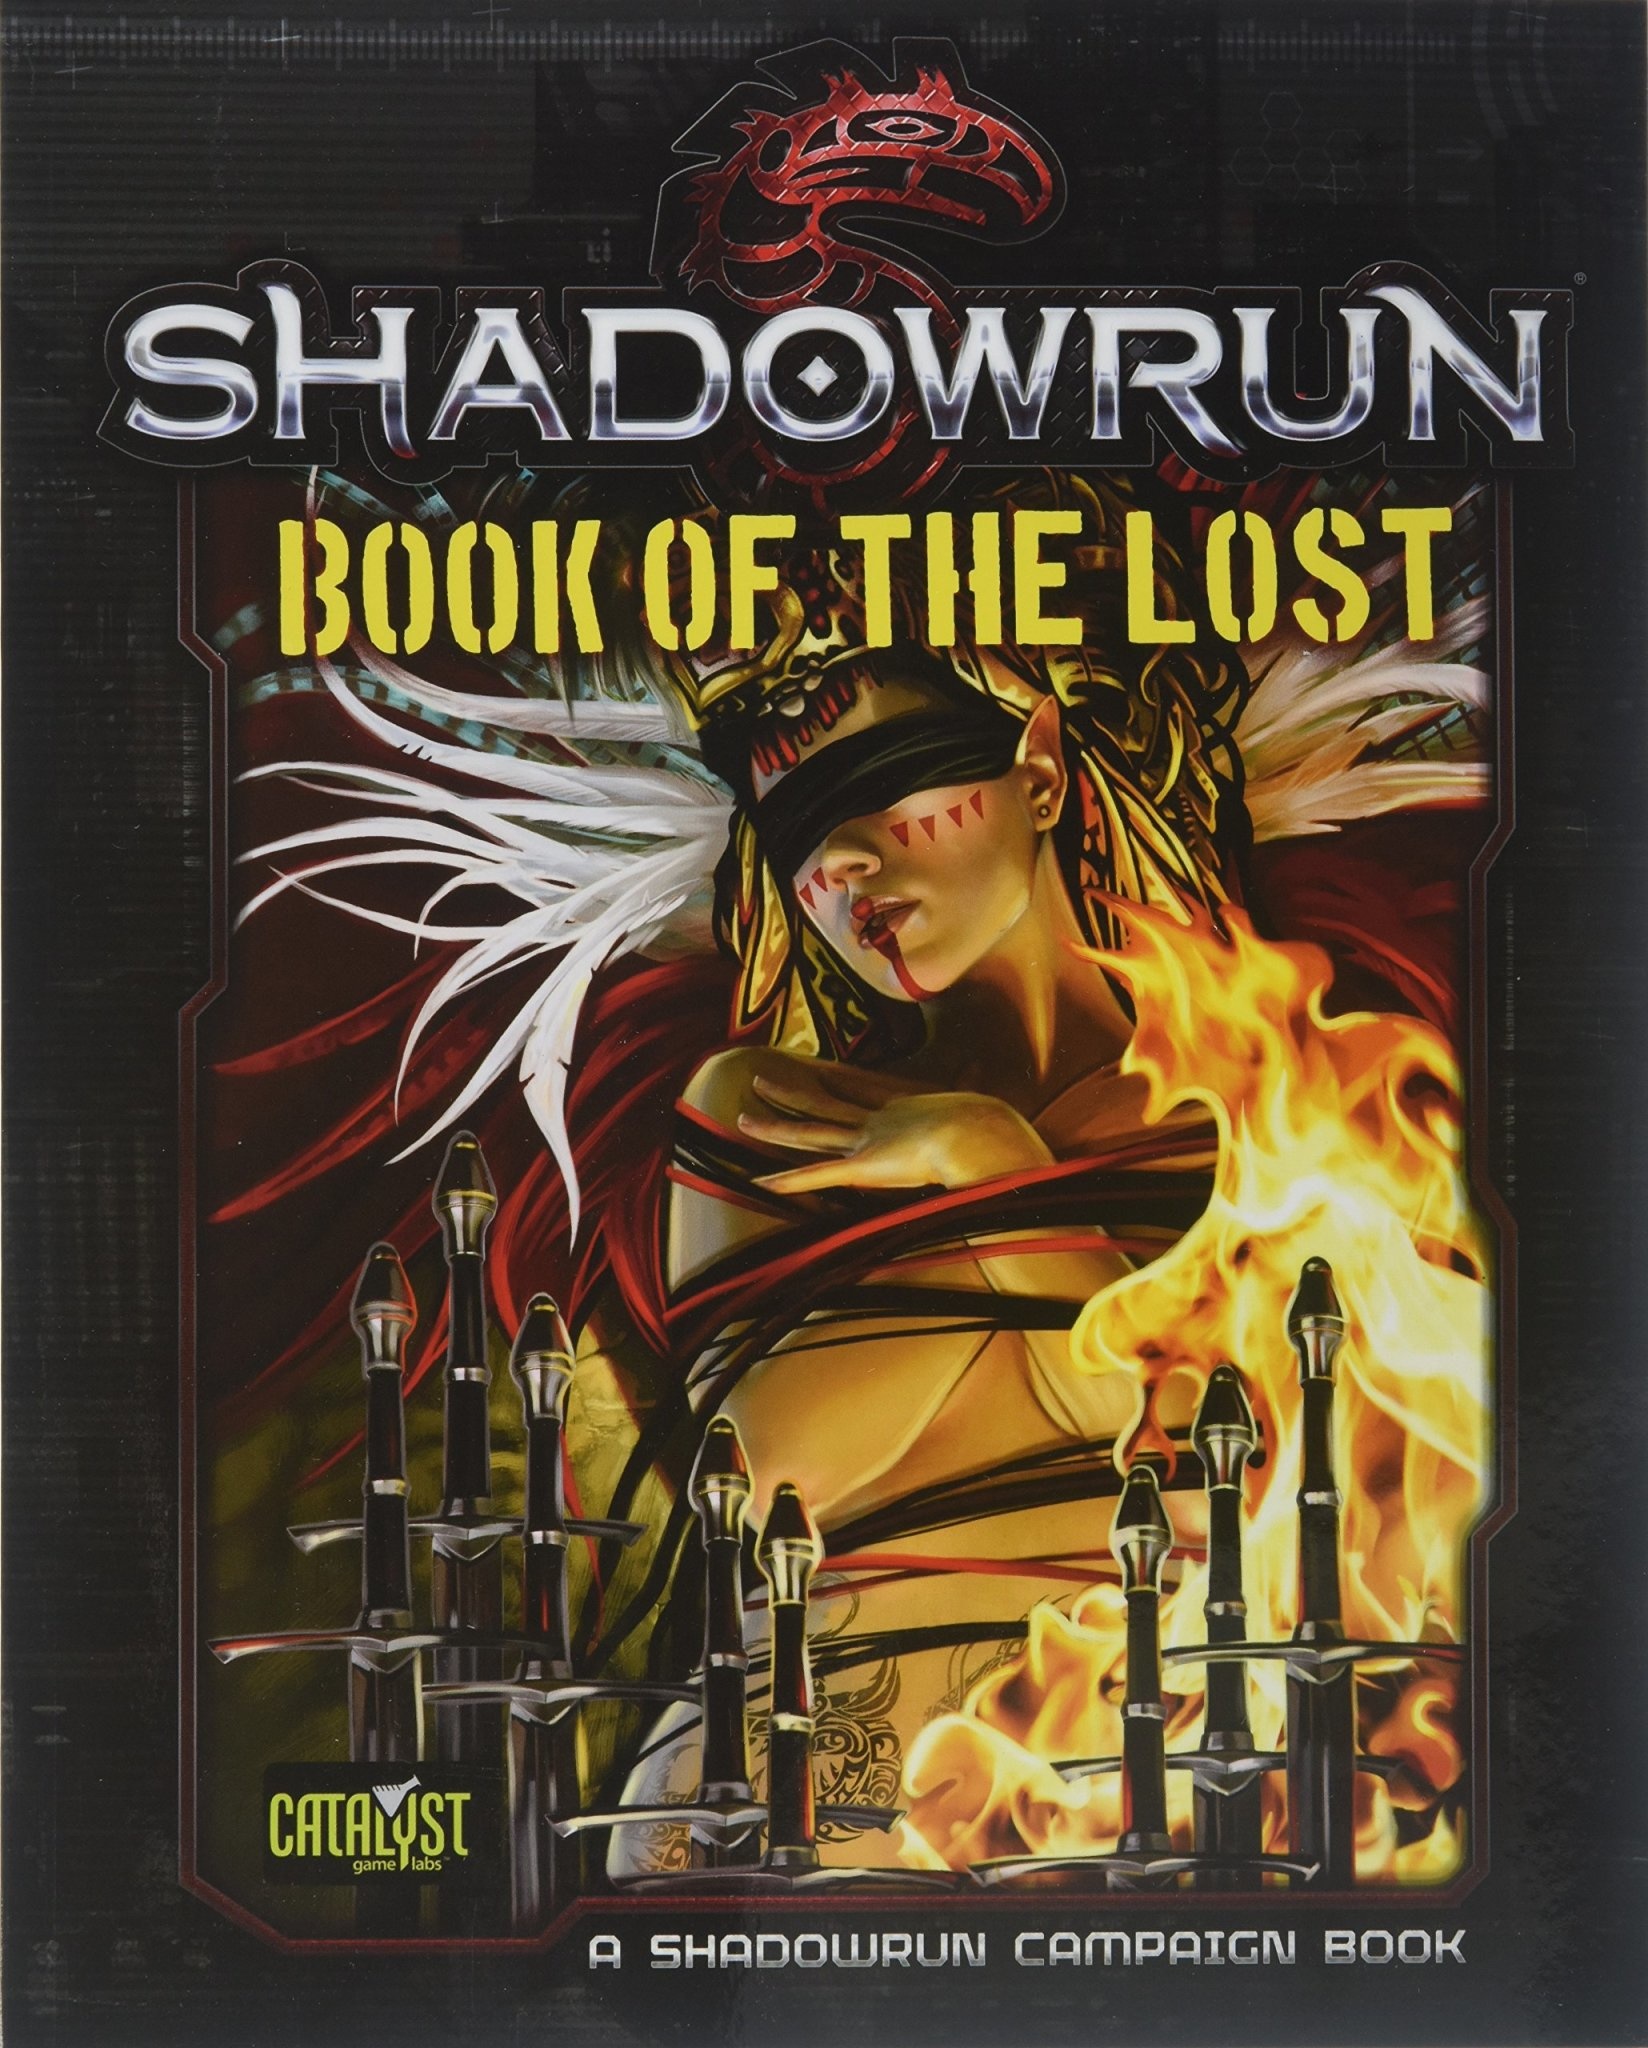 Shadowrun: Book of the Lost